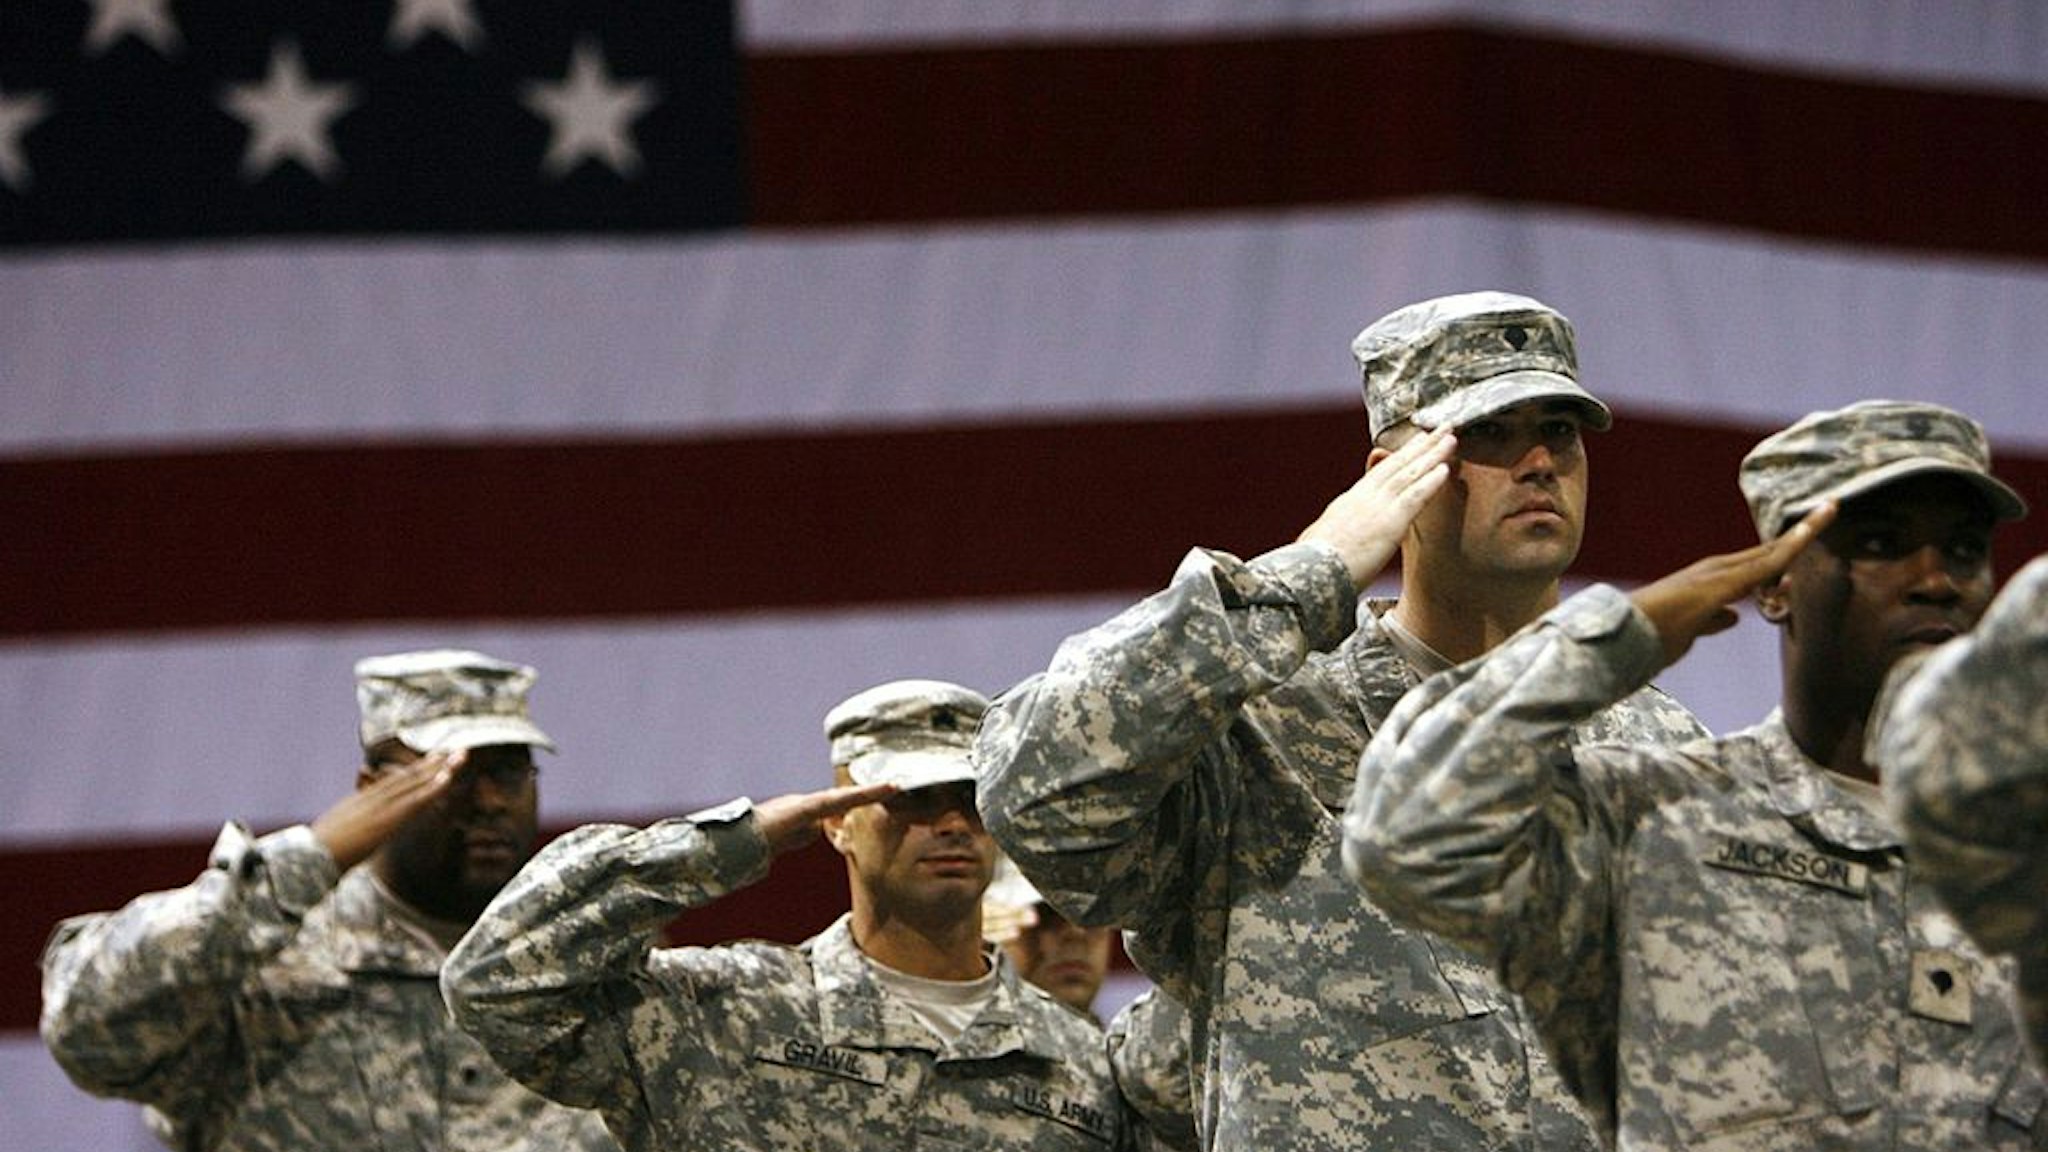 FORT RILEY, KS - SEPTEMBER 12: Soldiers stand saluting during the national anthem for the redeployment ceremony at Marshall Army Air Field inside hanger 727 for the 1st Battalion, 16th Infantry Regiment, 1st Brigade, 1st Infantry Division September 12, 2007 at Fort Riley, Kansas. The approximately 130 soldiers were returning after a one year tour in Iraq.